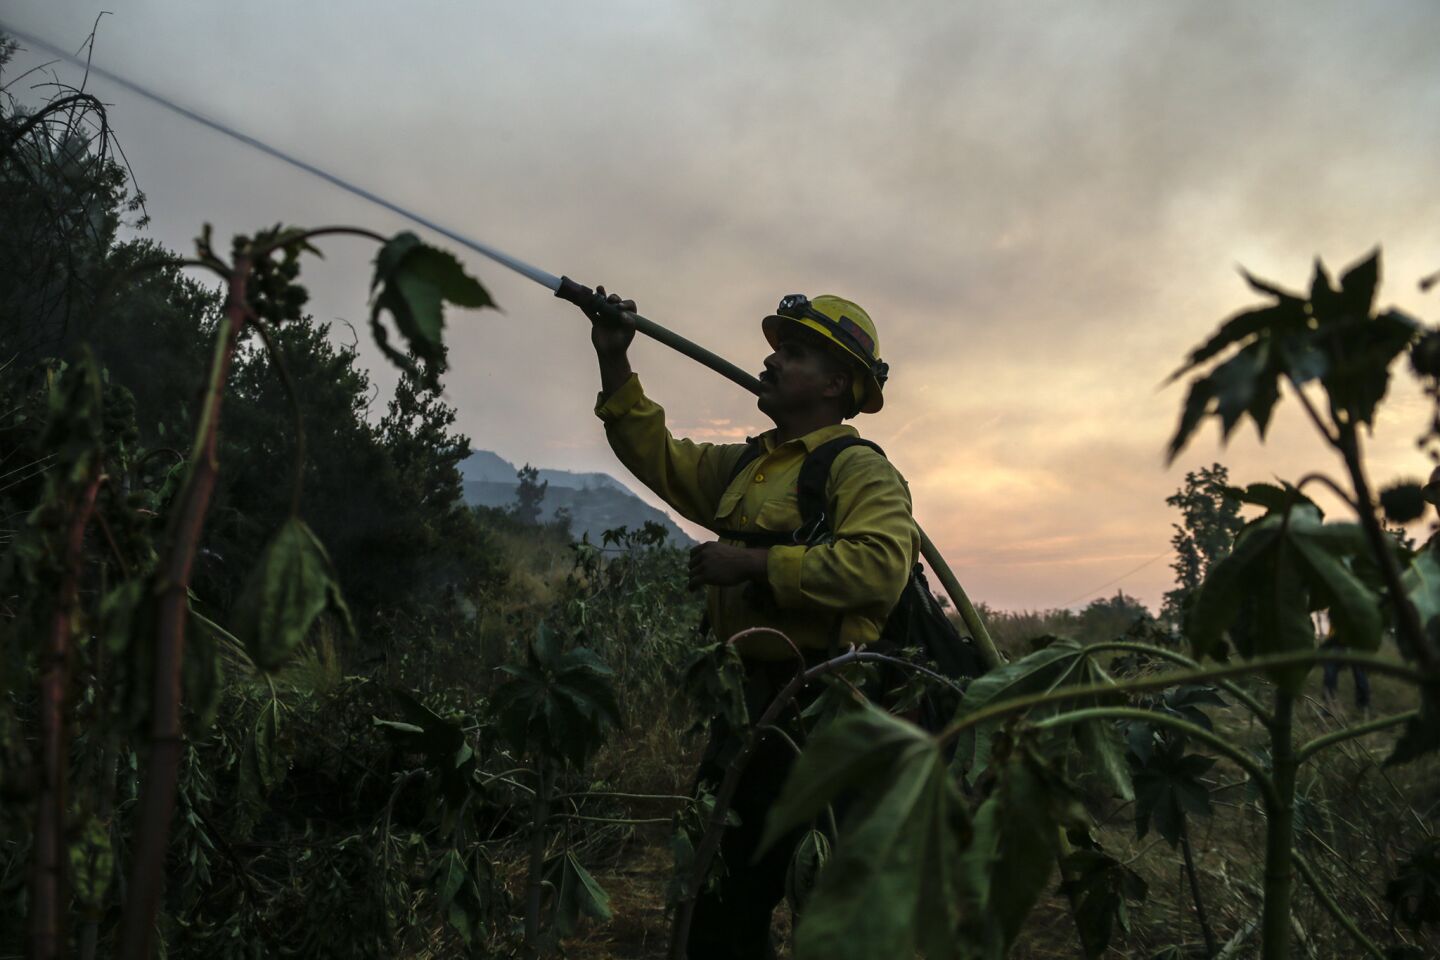 U.S. Forest Sevice firefighter Pedro Barba keeps the hillside wet along Brookridge Road as a wildfire burns above the hills in Duarte on Tuesday morning.